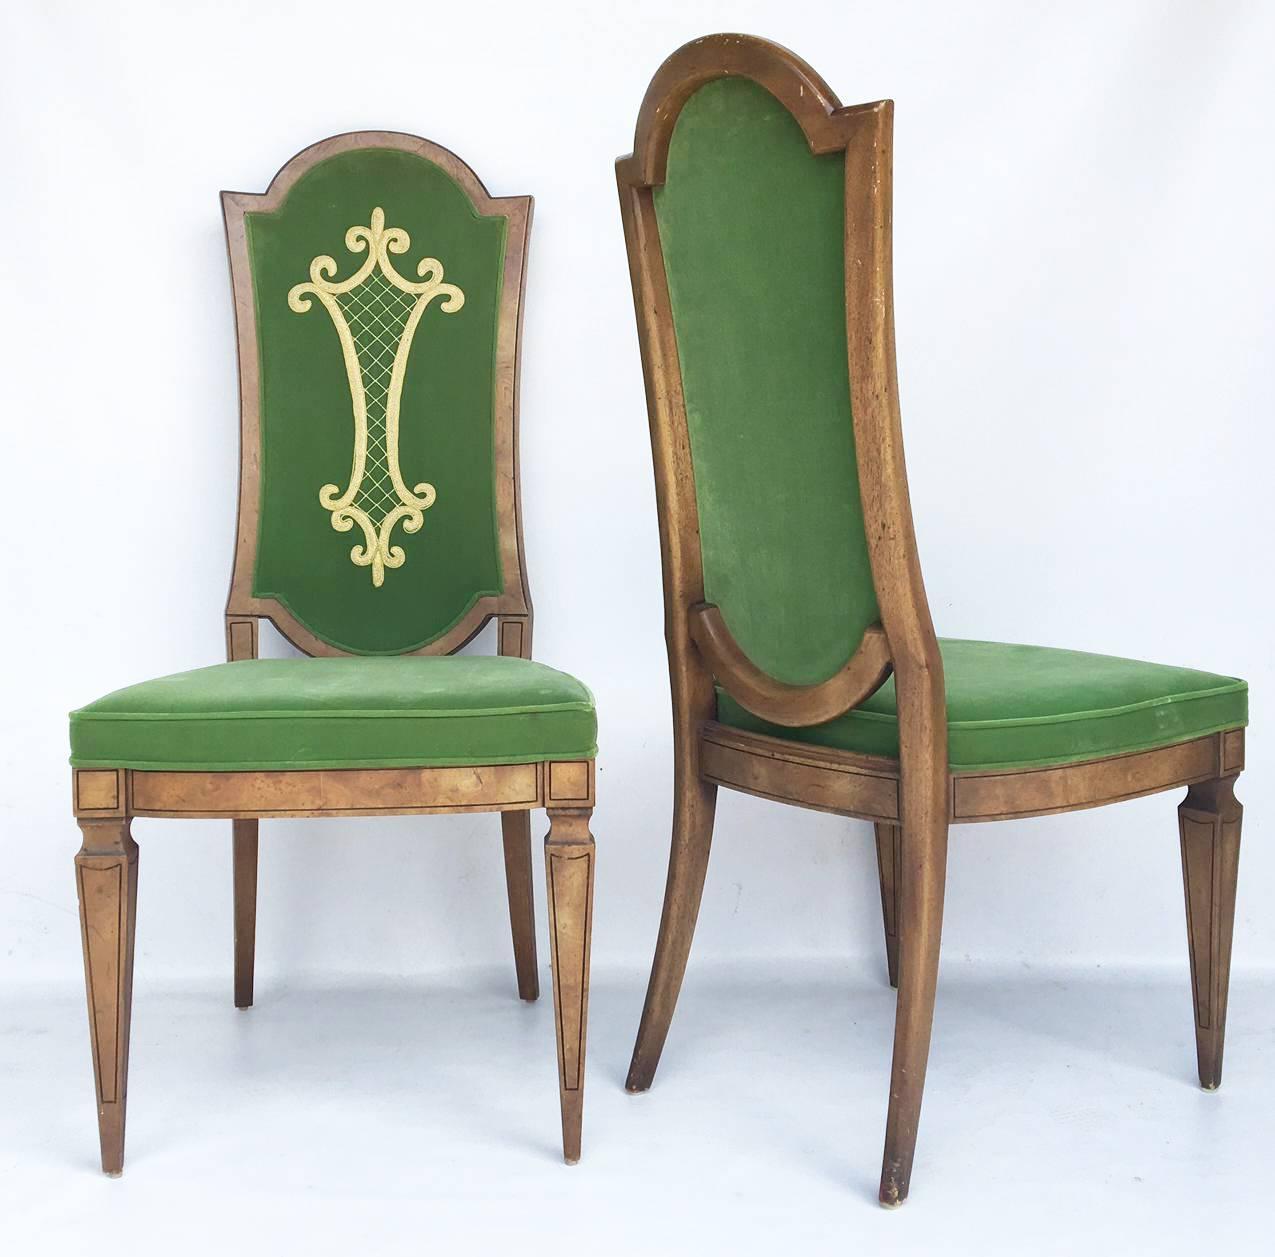 Exquisite custom set of eight dining chairs inspired by Dorothy Draper. Each chair sits atop neoclassic tapered legs.
Green velvet cushioned seat and backrest with an ornate golden embroidered detail.
Six dining chairs and two armchairs. Excellent